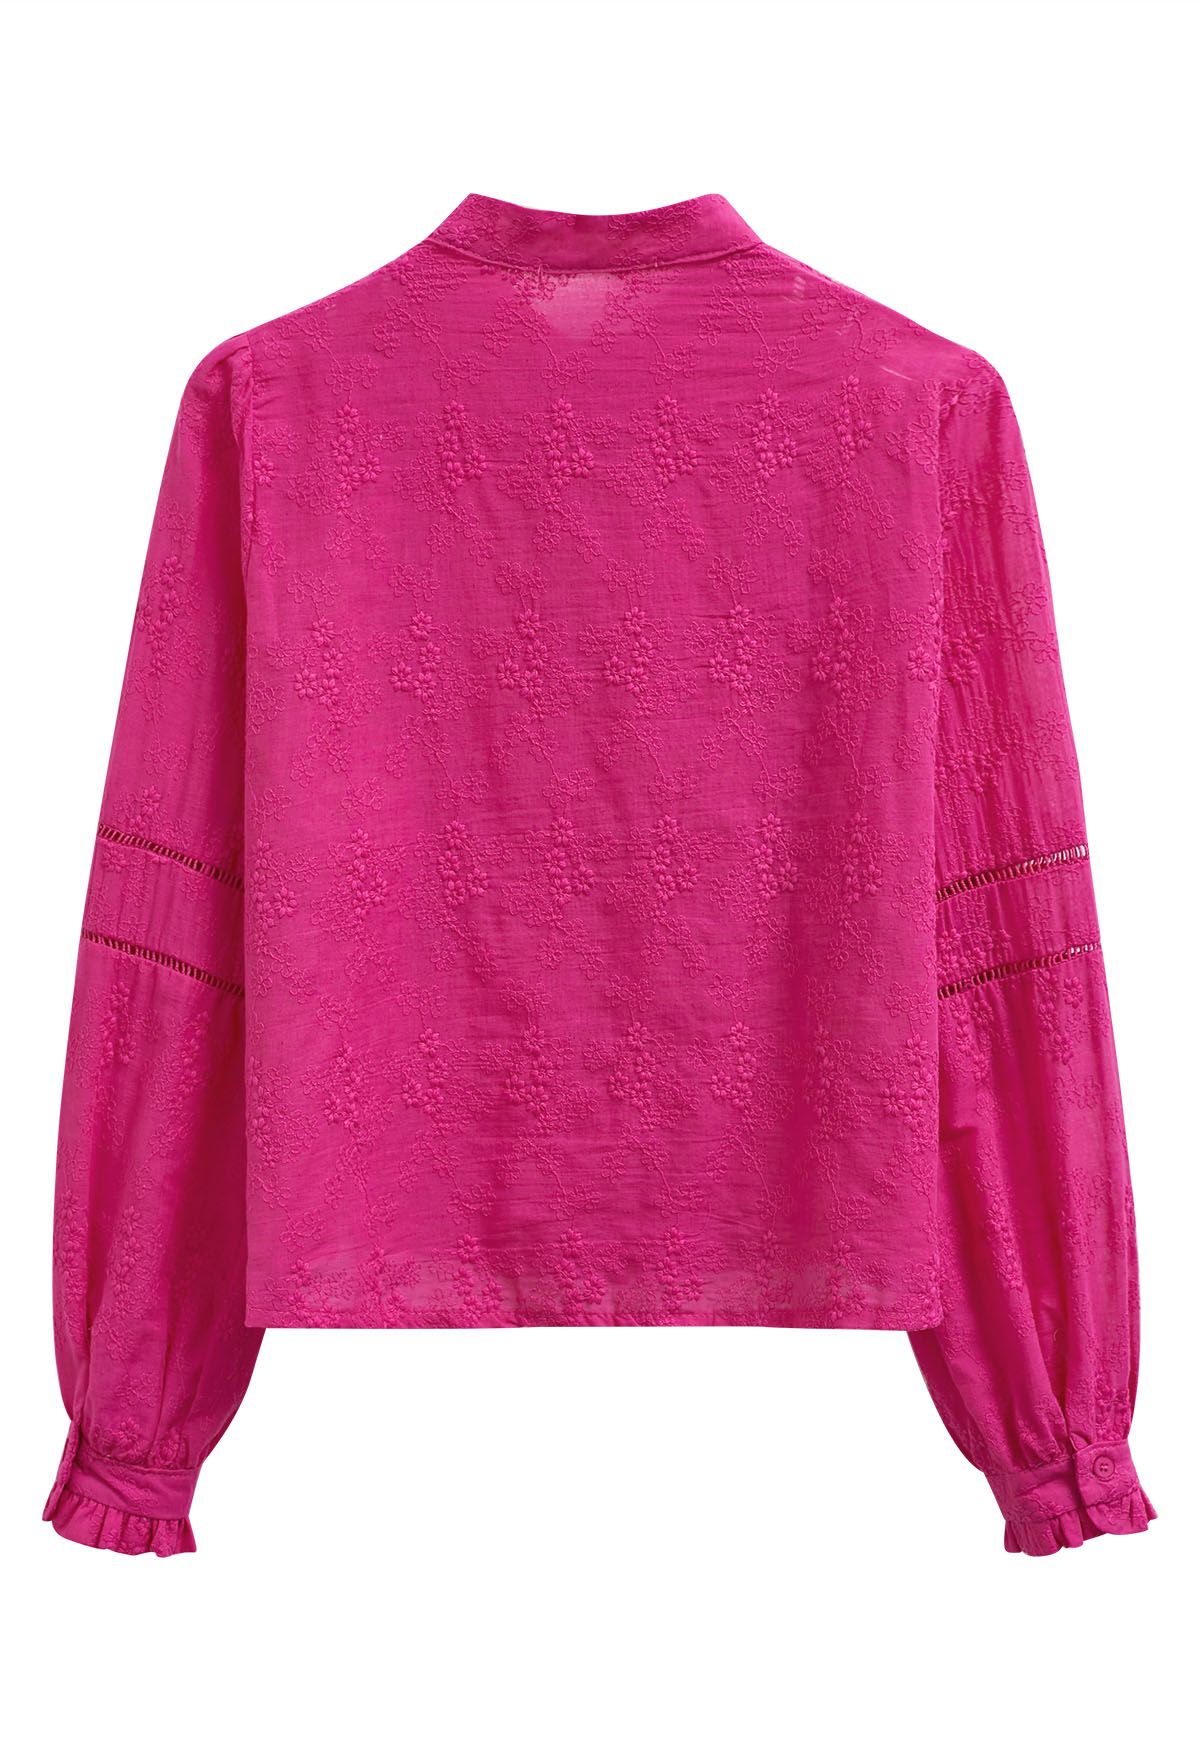 Floret Embroidered Pintuck Button Down Shirt in Hot Pink